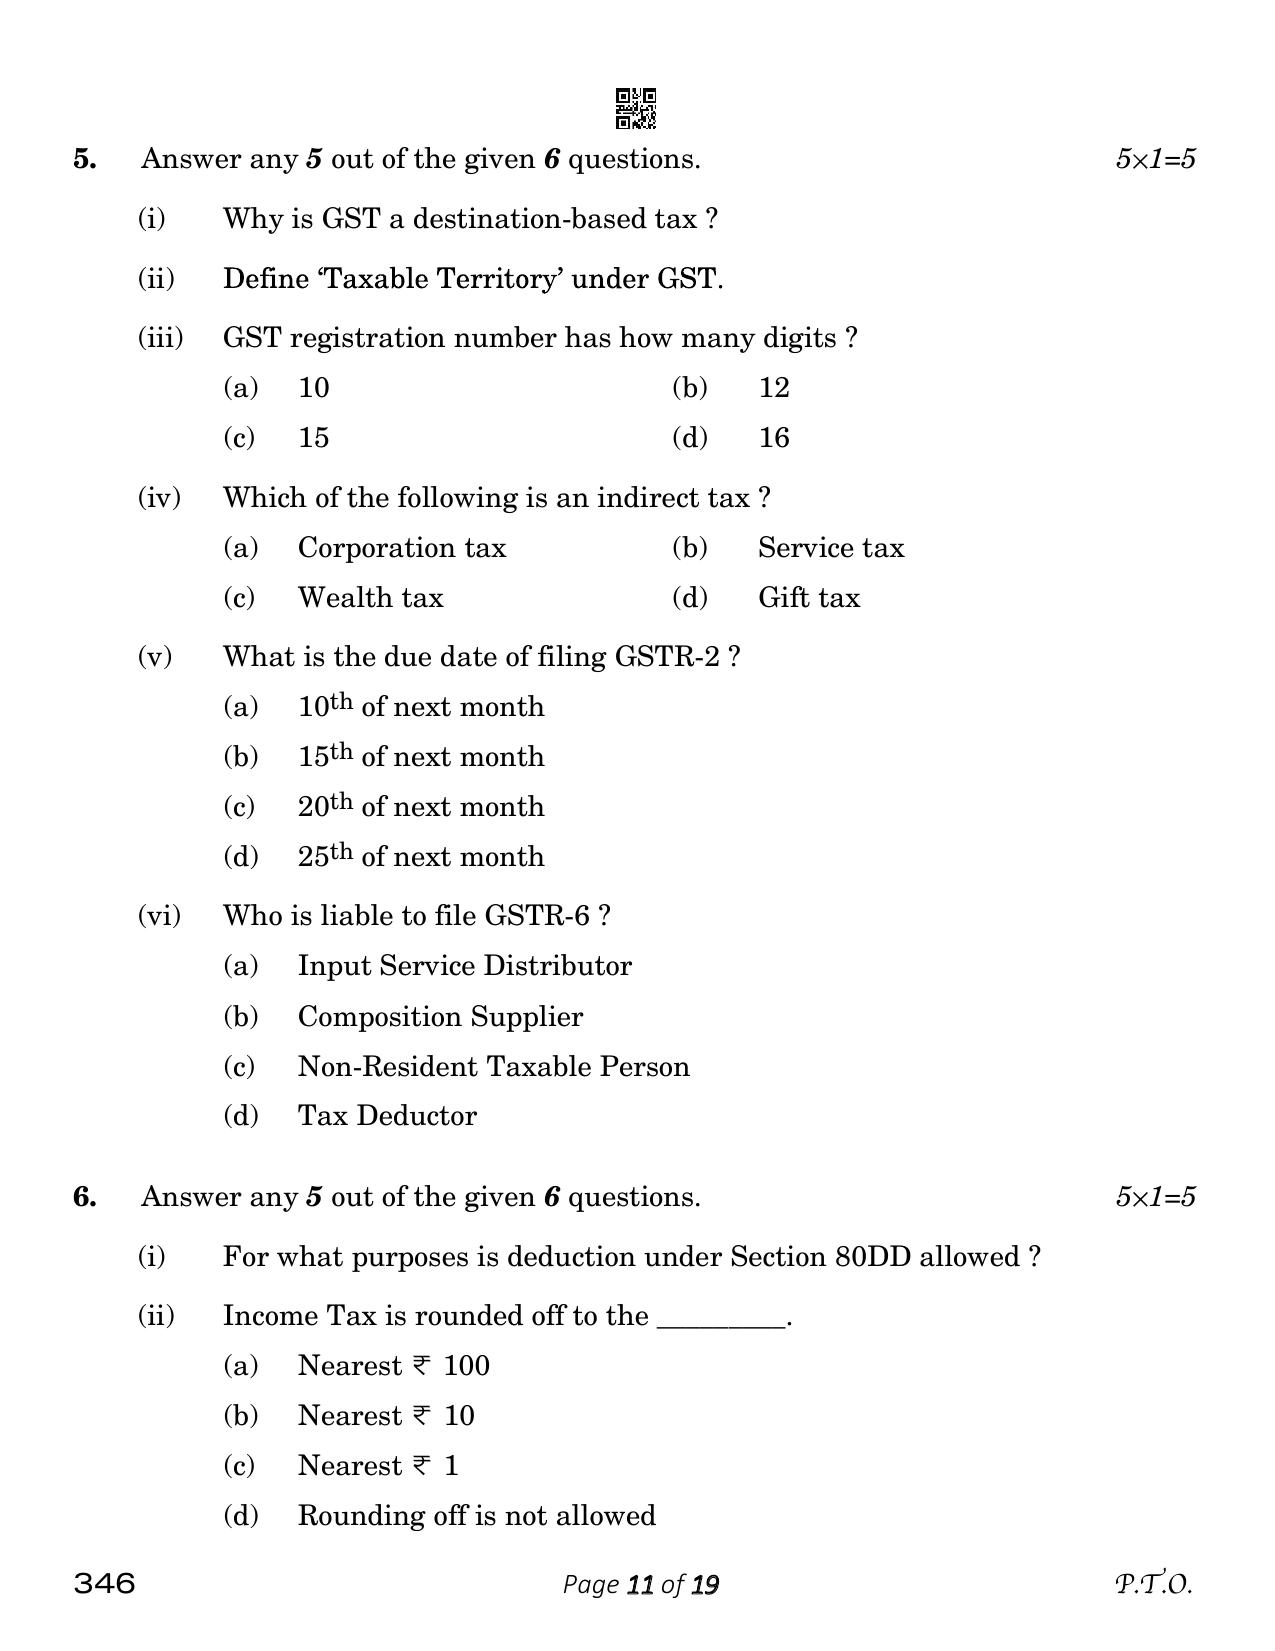 CBSE Class 12 Taxation (Compartment) 2023 Question Paper - Page 11